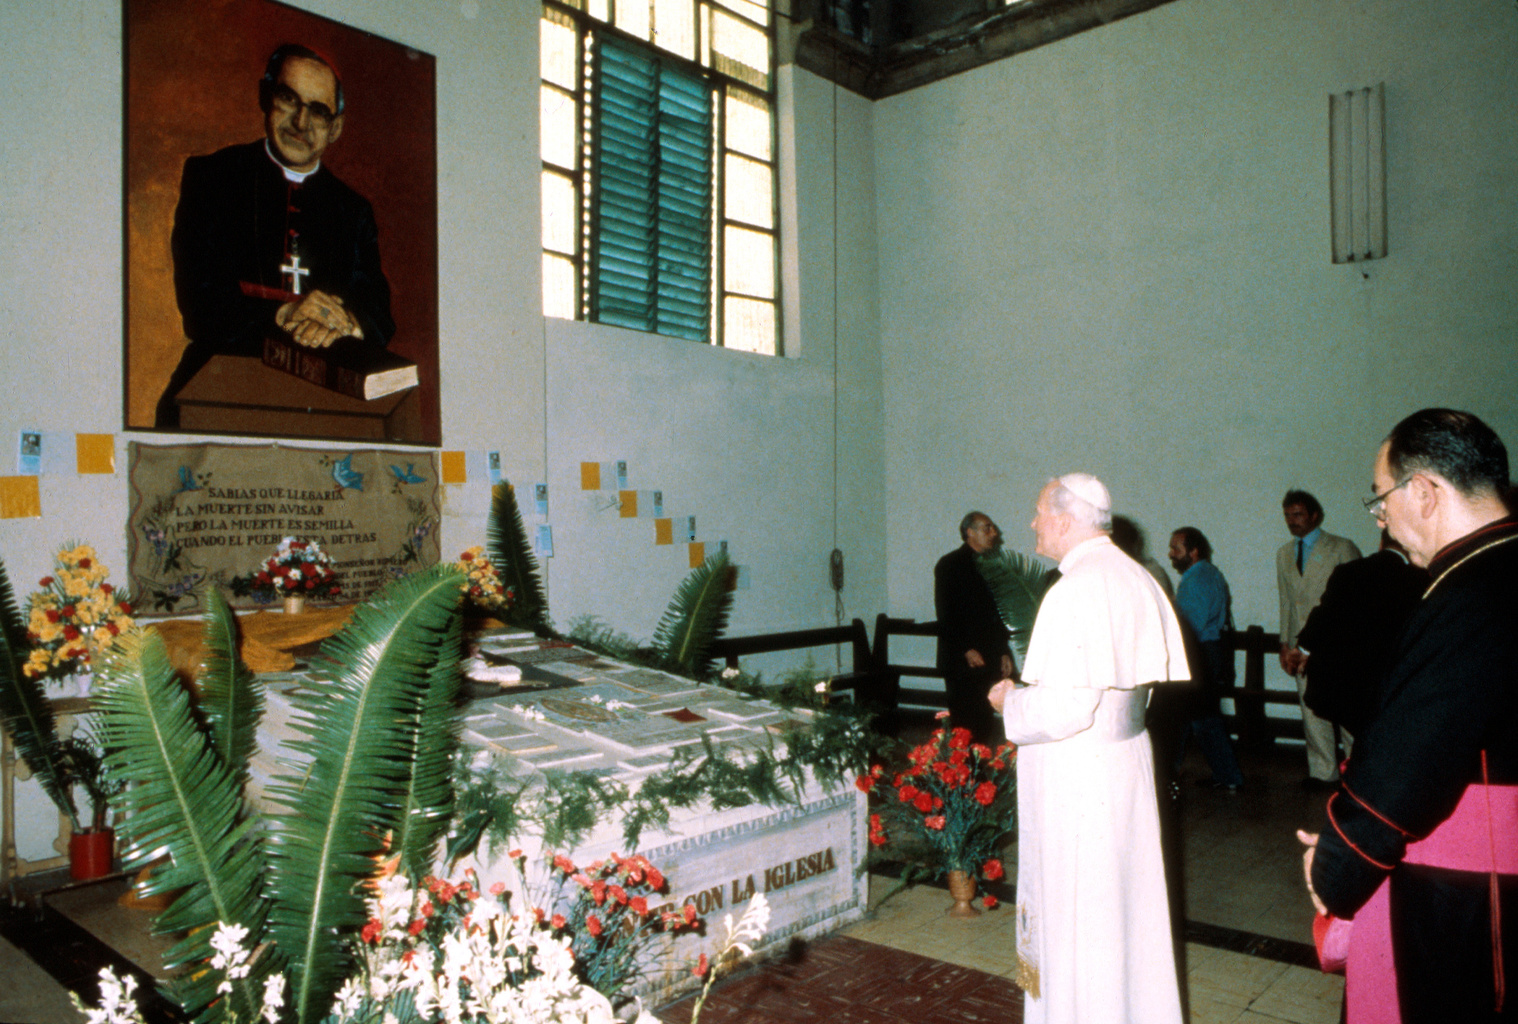 St. John Paul II prays before the tomb of Archbishop Oscar Romero in the San Salvador cathedral during his 1983 visit to the city. (CNS/Catholic Press Photo/Giancarlo Giuliani)